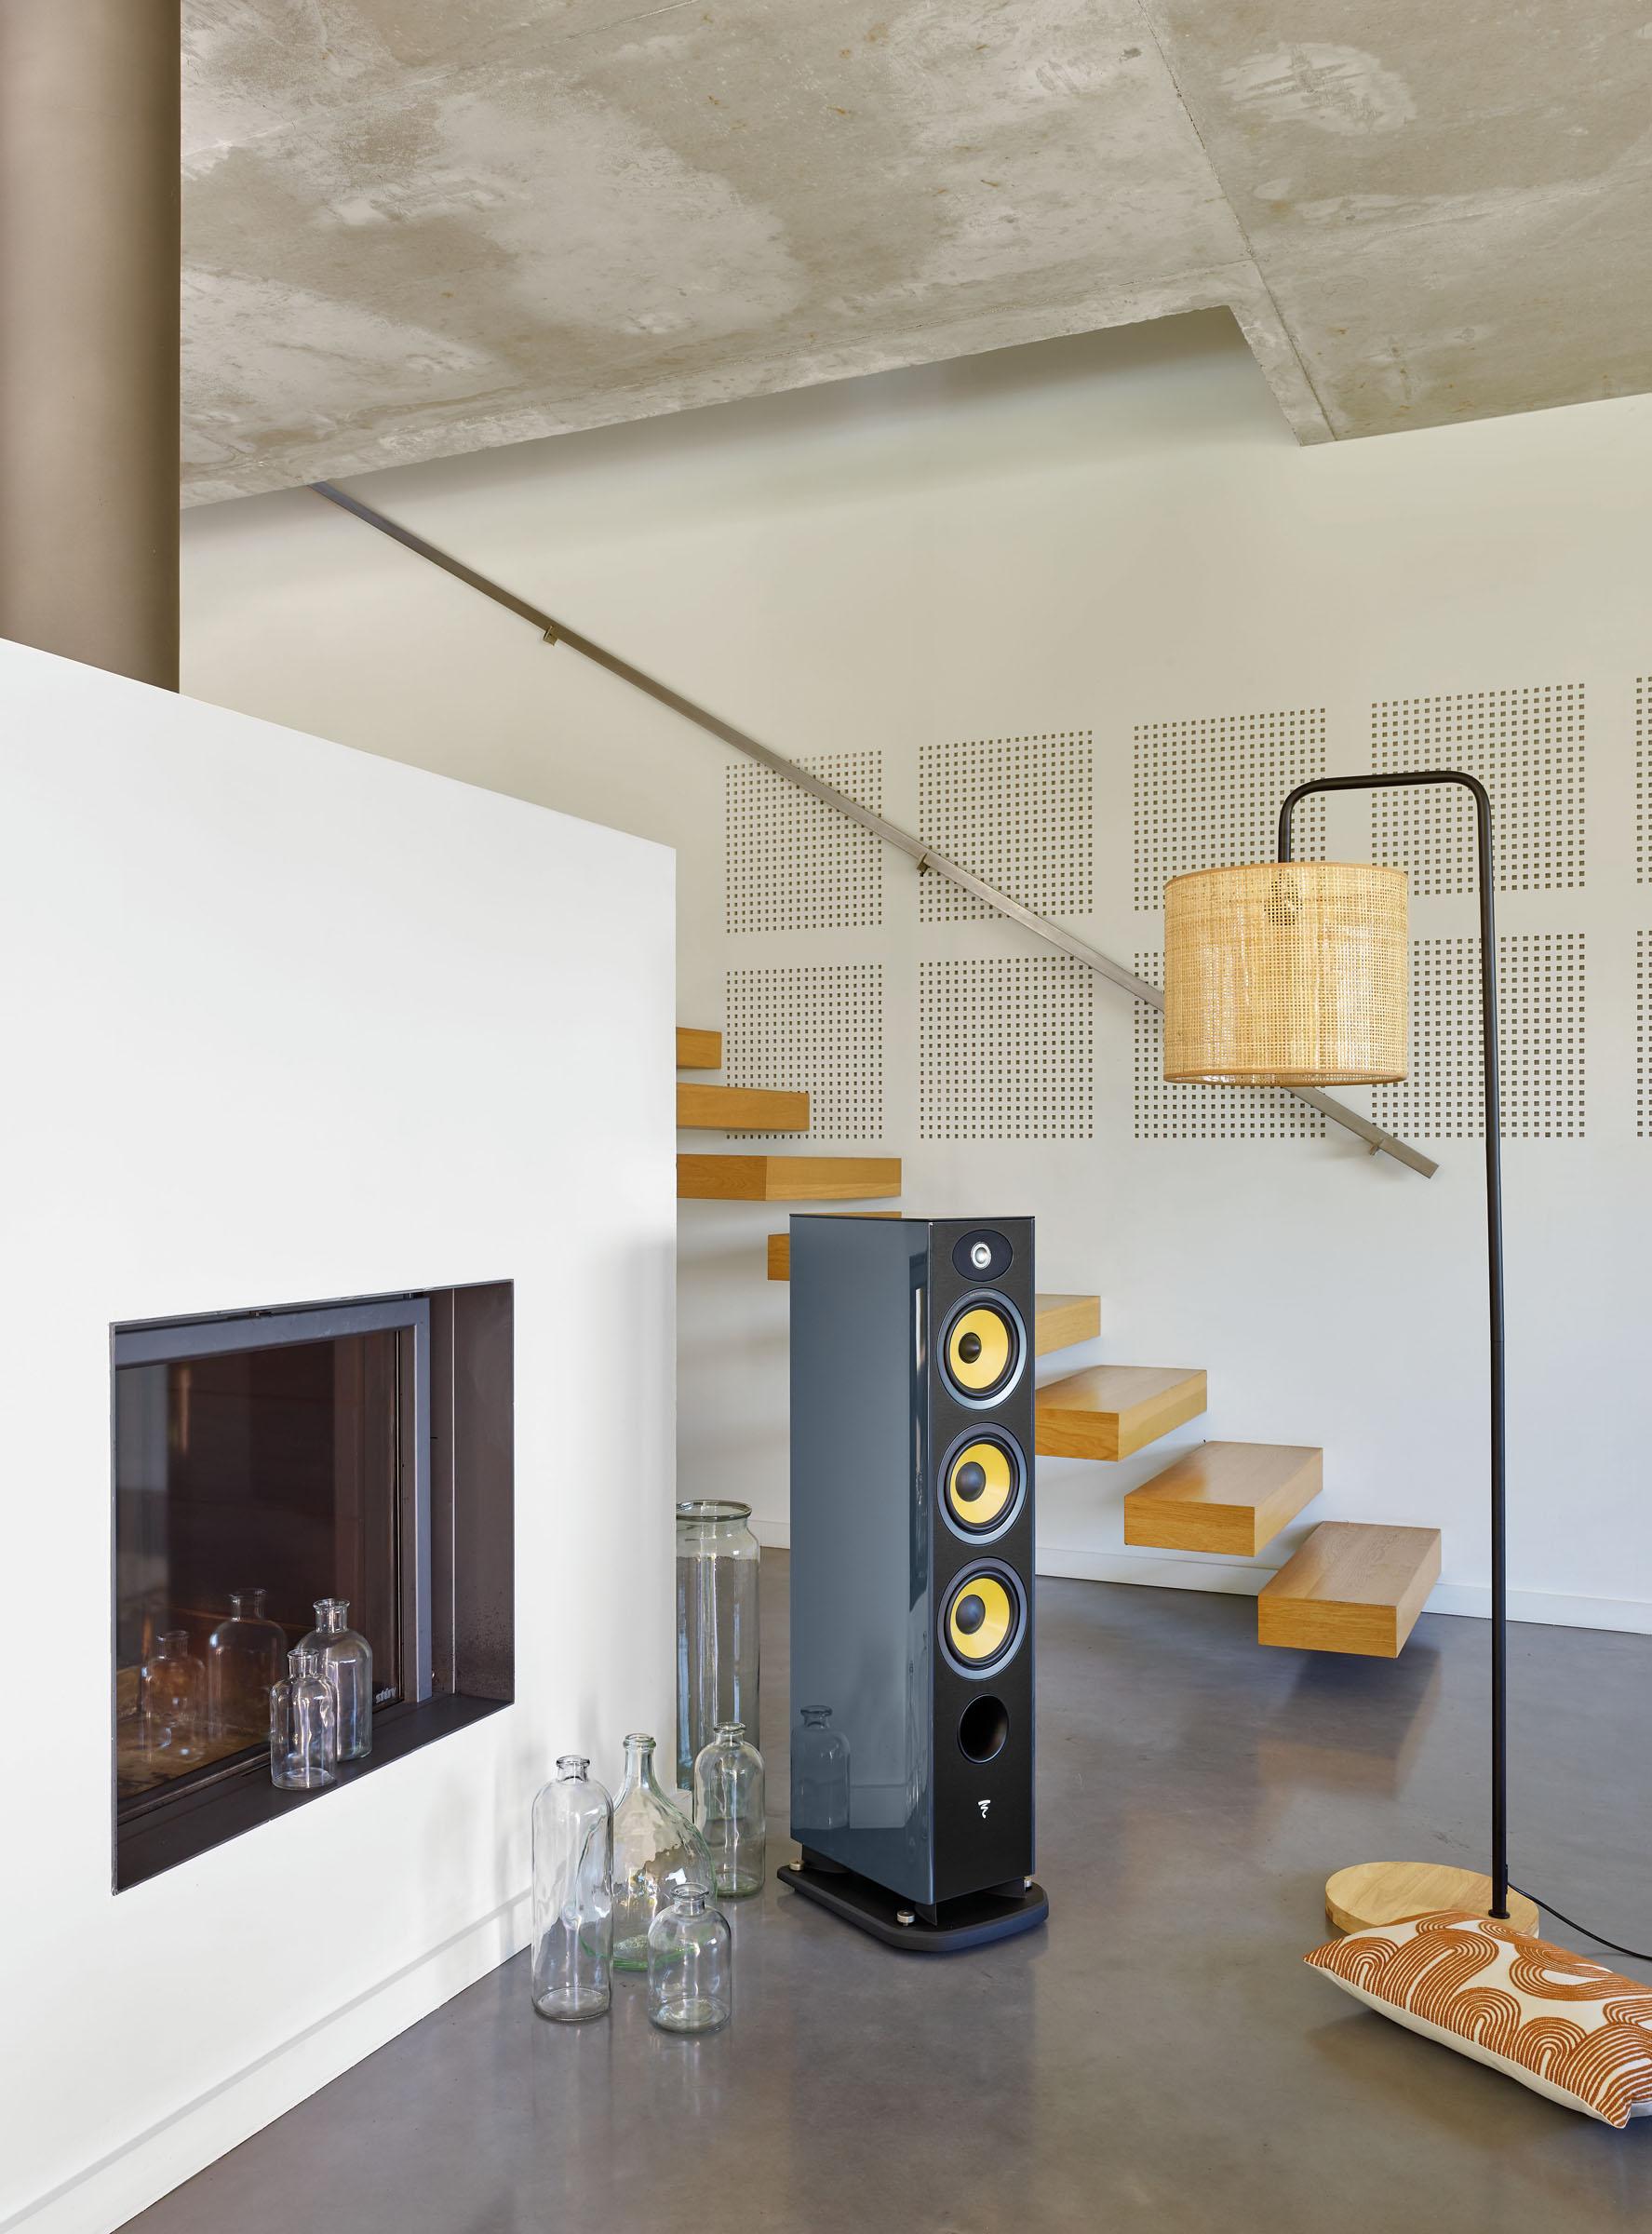 Focal and Naim present a complete, cohesive Hi-Fi featuring Aria K2 926 speakers & the Uniti Star in Ash Grey fd91fe5a aria926 k2 06